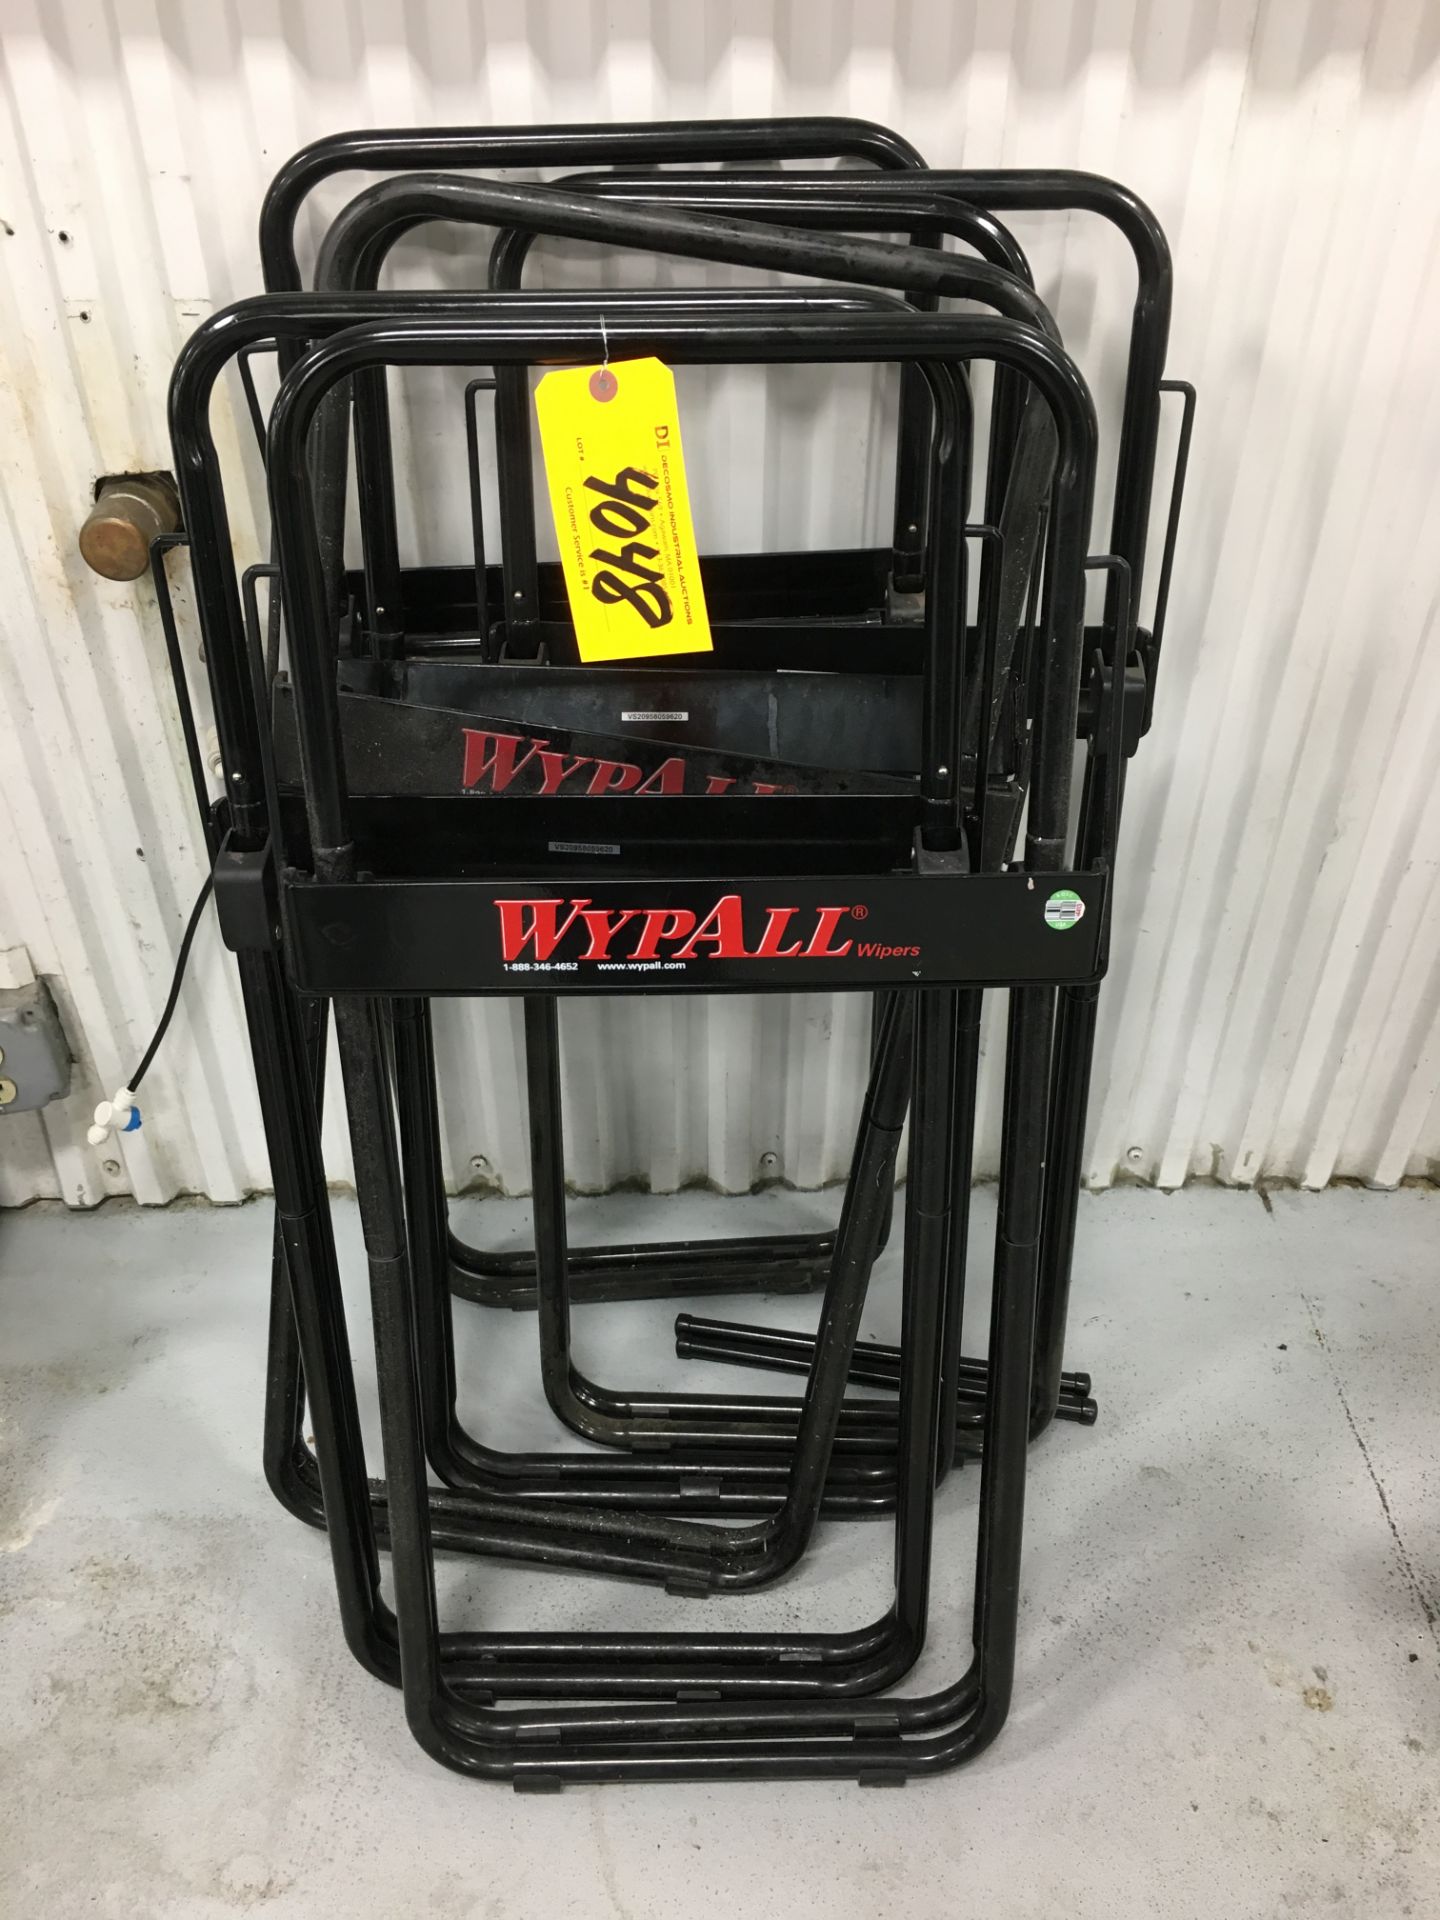 WYPALL SHOP RAG STANDS